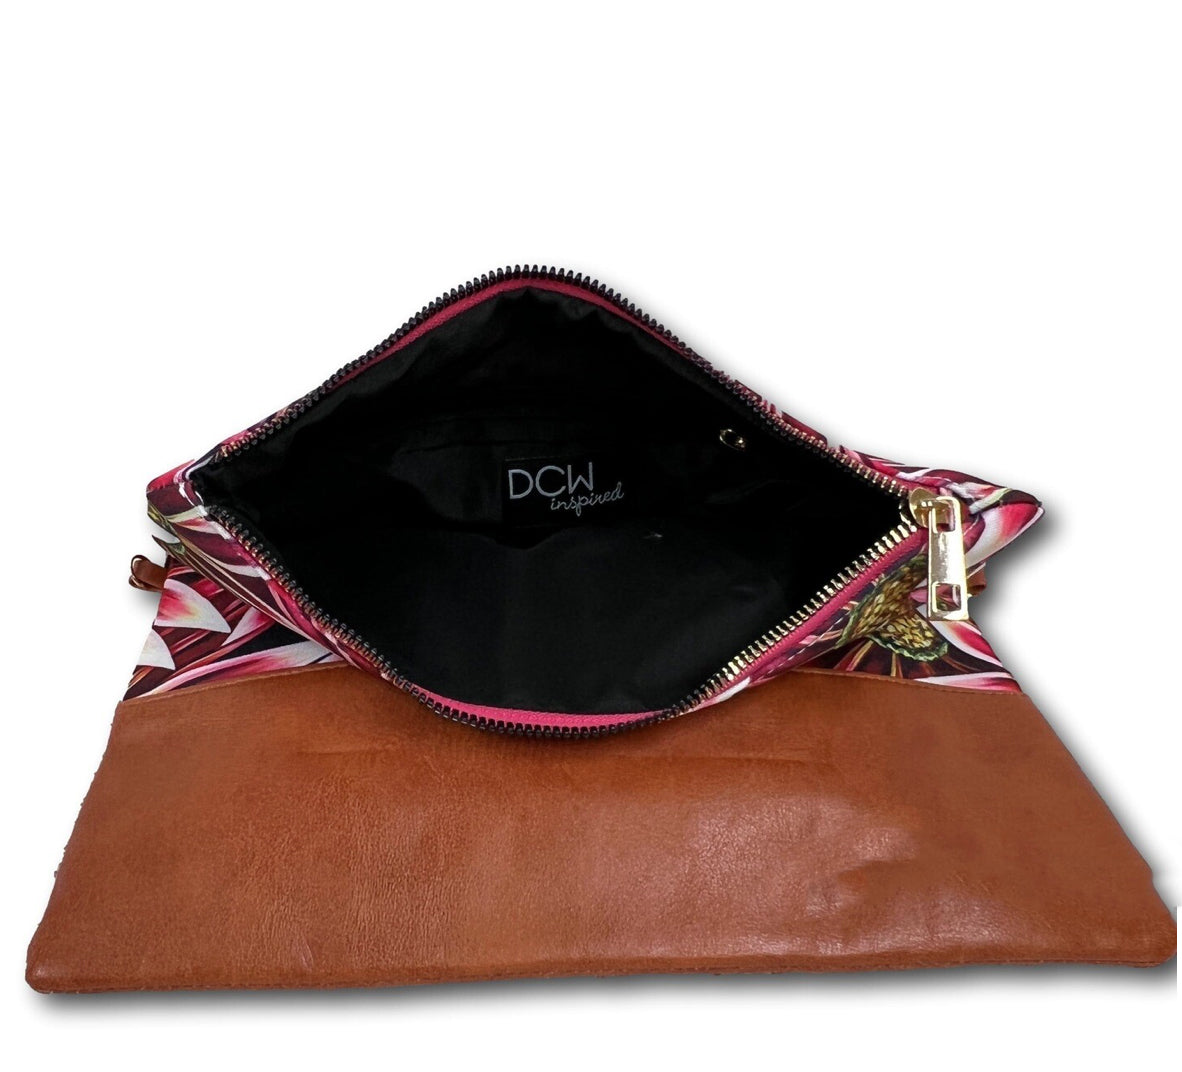 This versatile crossbody by Denise Cassidy Wood of DCW Inspired acts as two bags in one. Attach the crossbody strap for a stylish crossbody bag or remove it and dress up your evening with a fun little clutch.